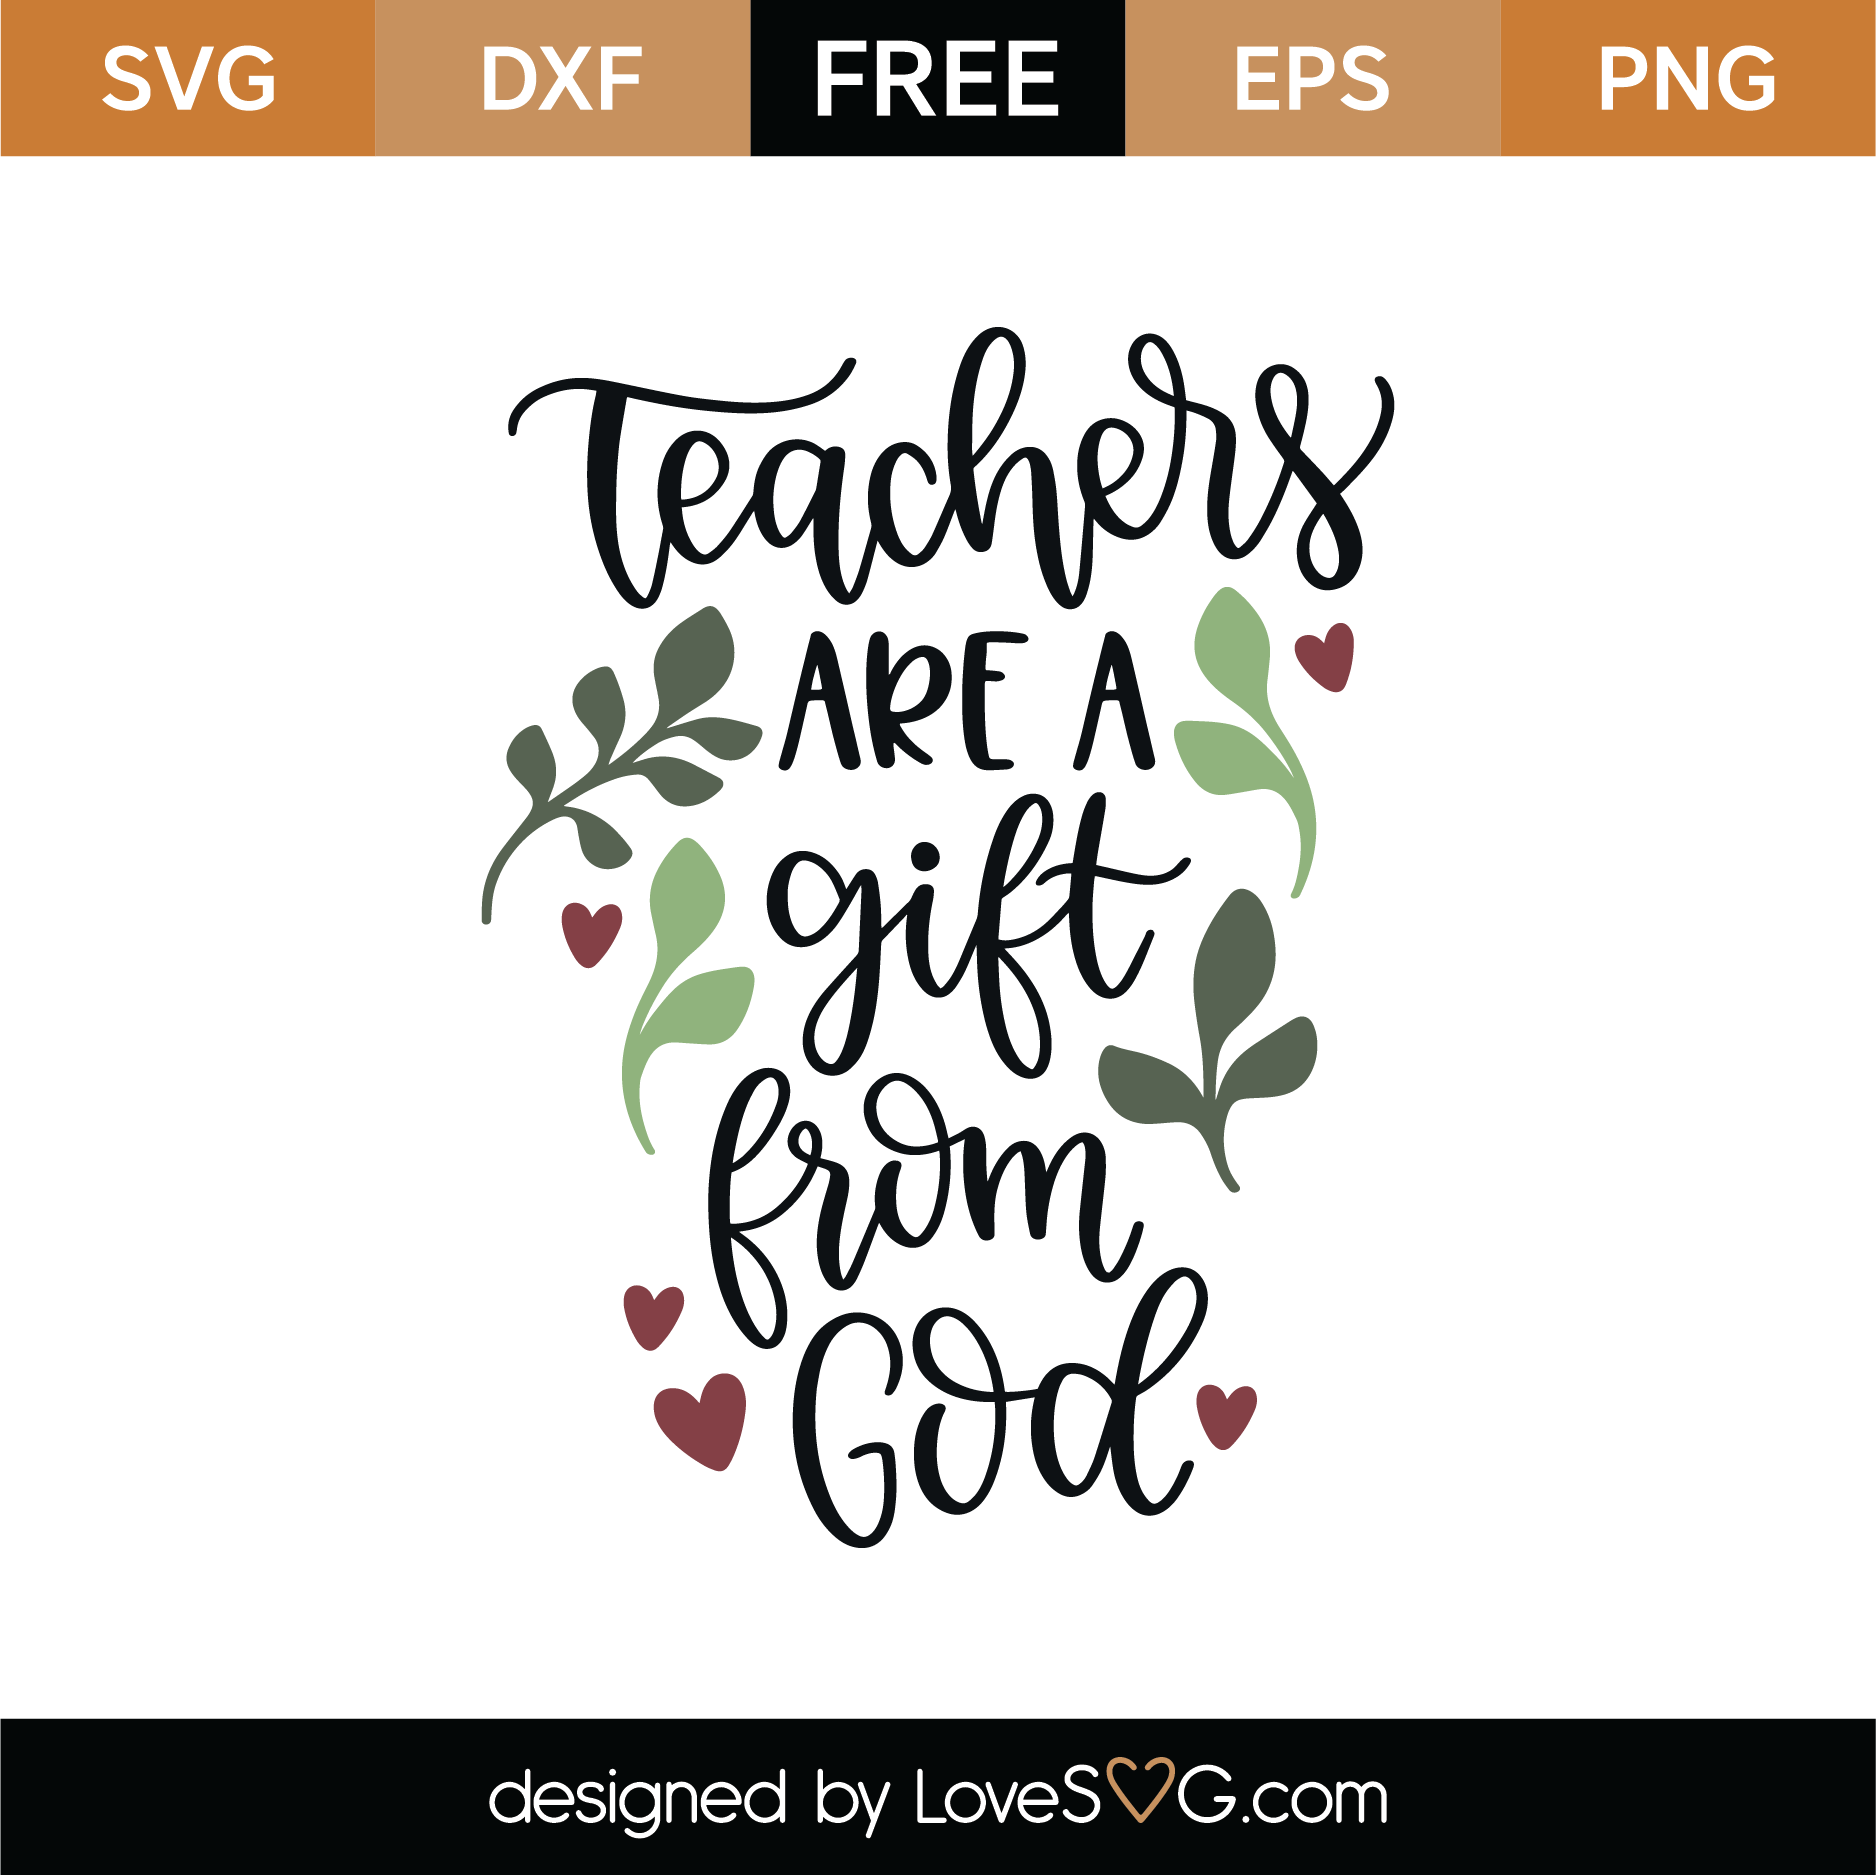 Download Free Teachers Are A Gift From God SVG Cut File | Lovesvg.com